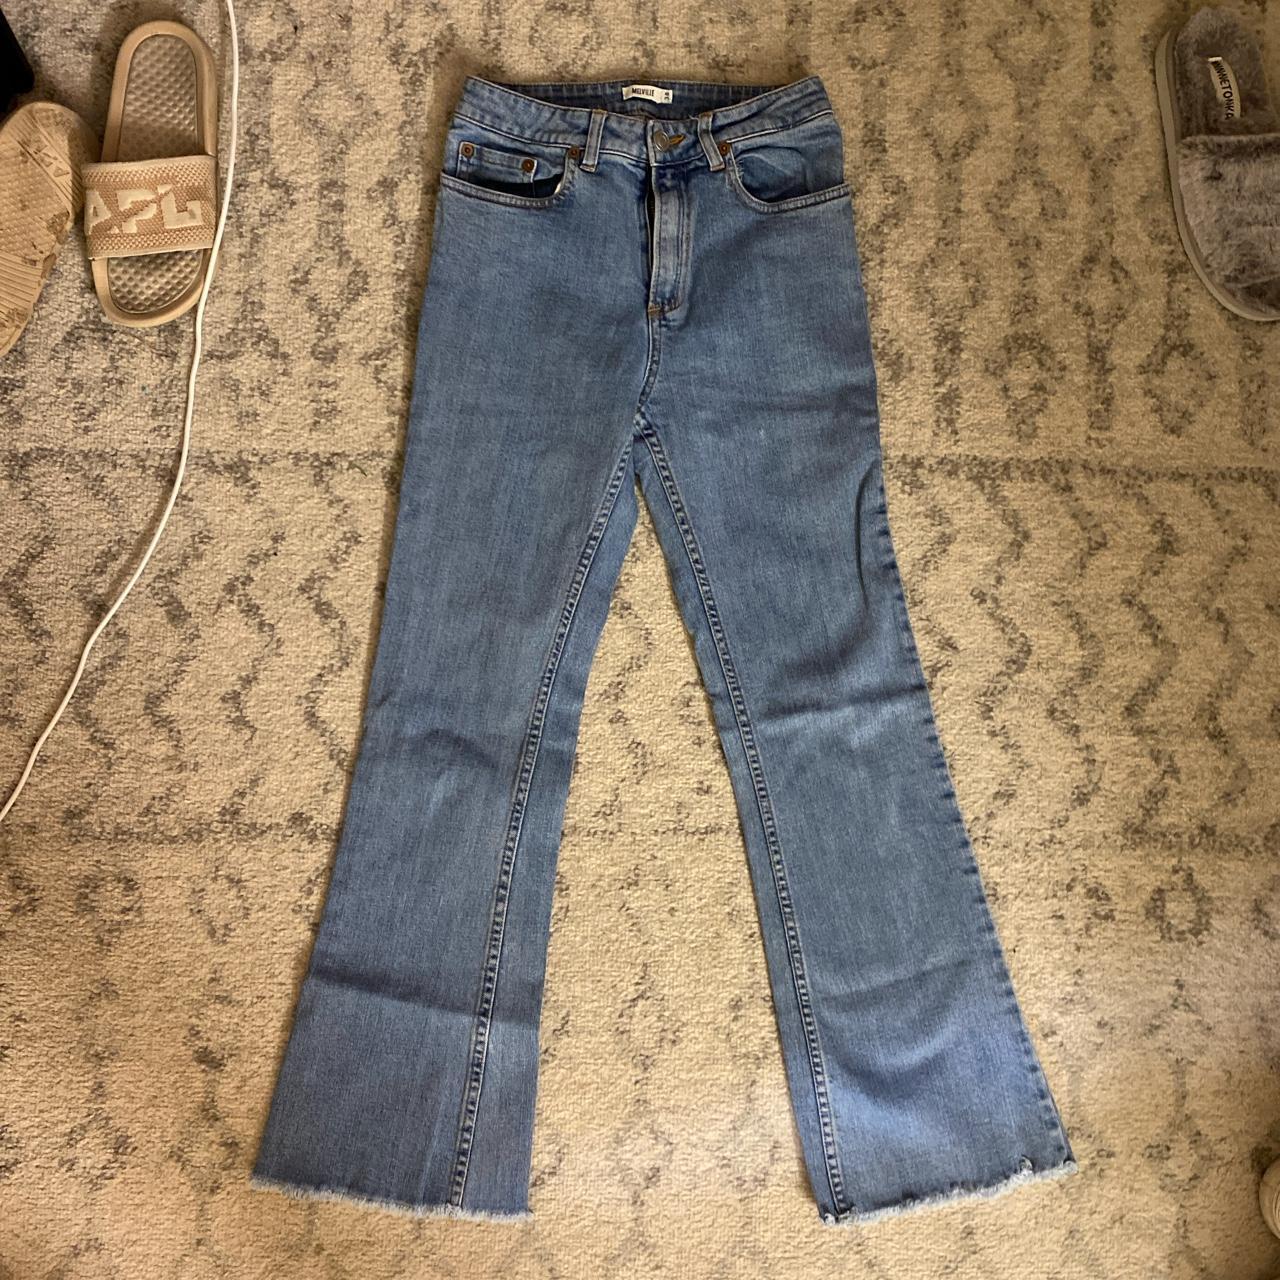 Brandy Melville flares jeans purchased in Italy four... - Depop